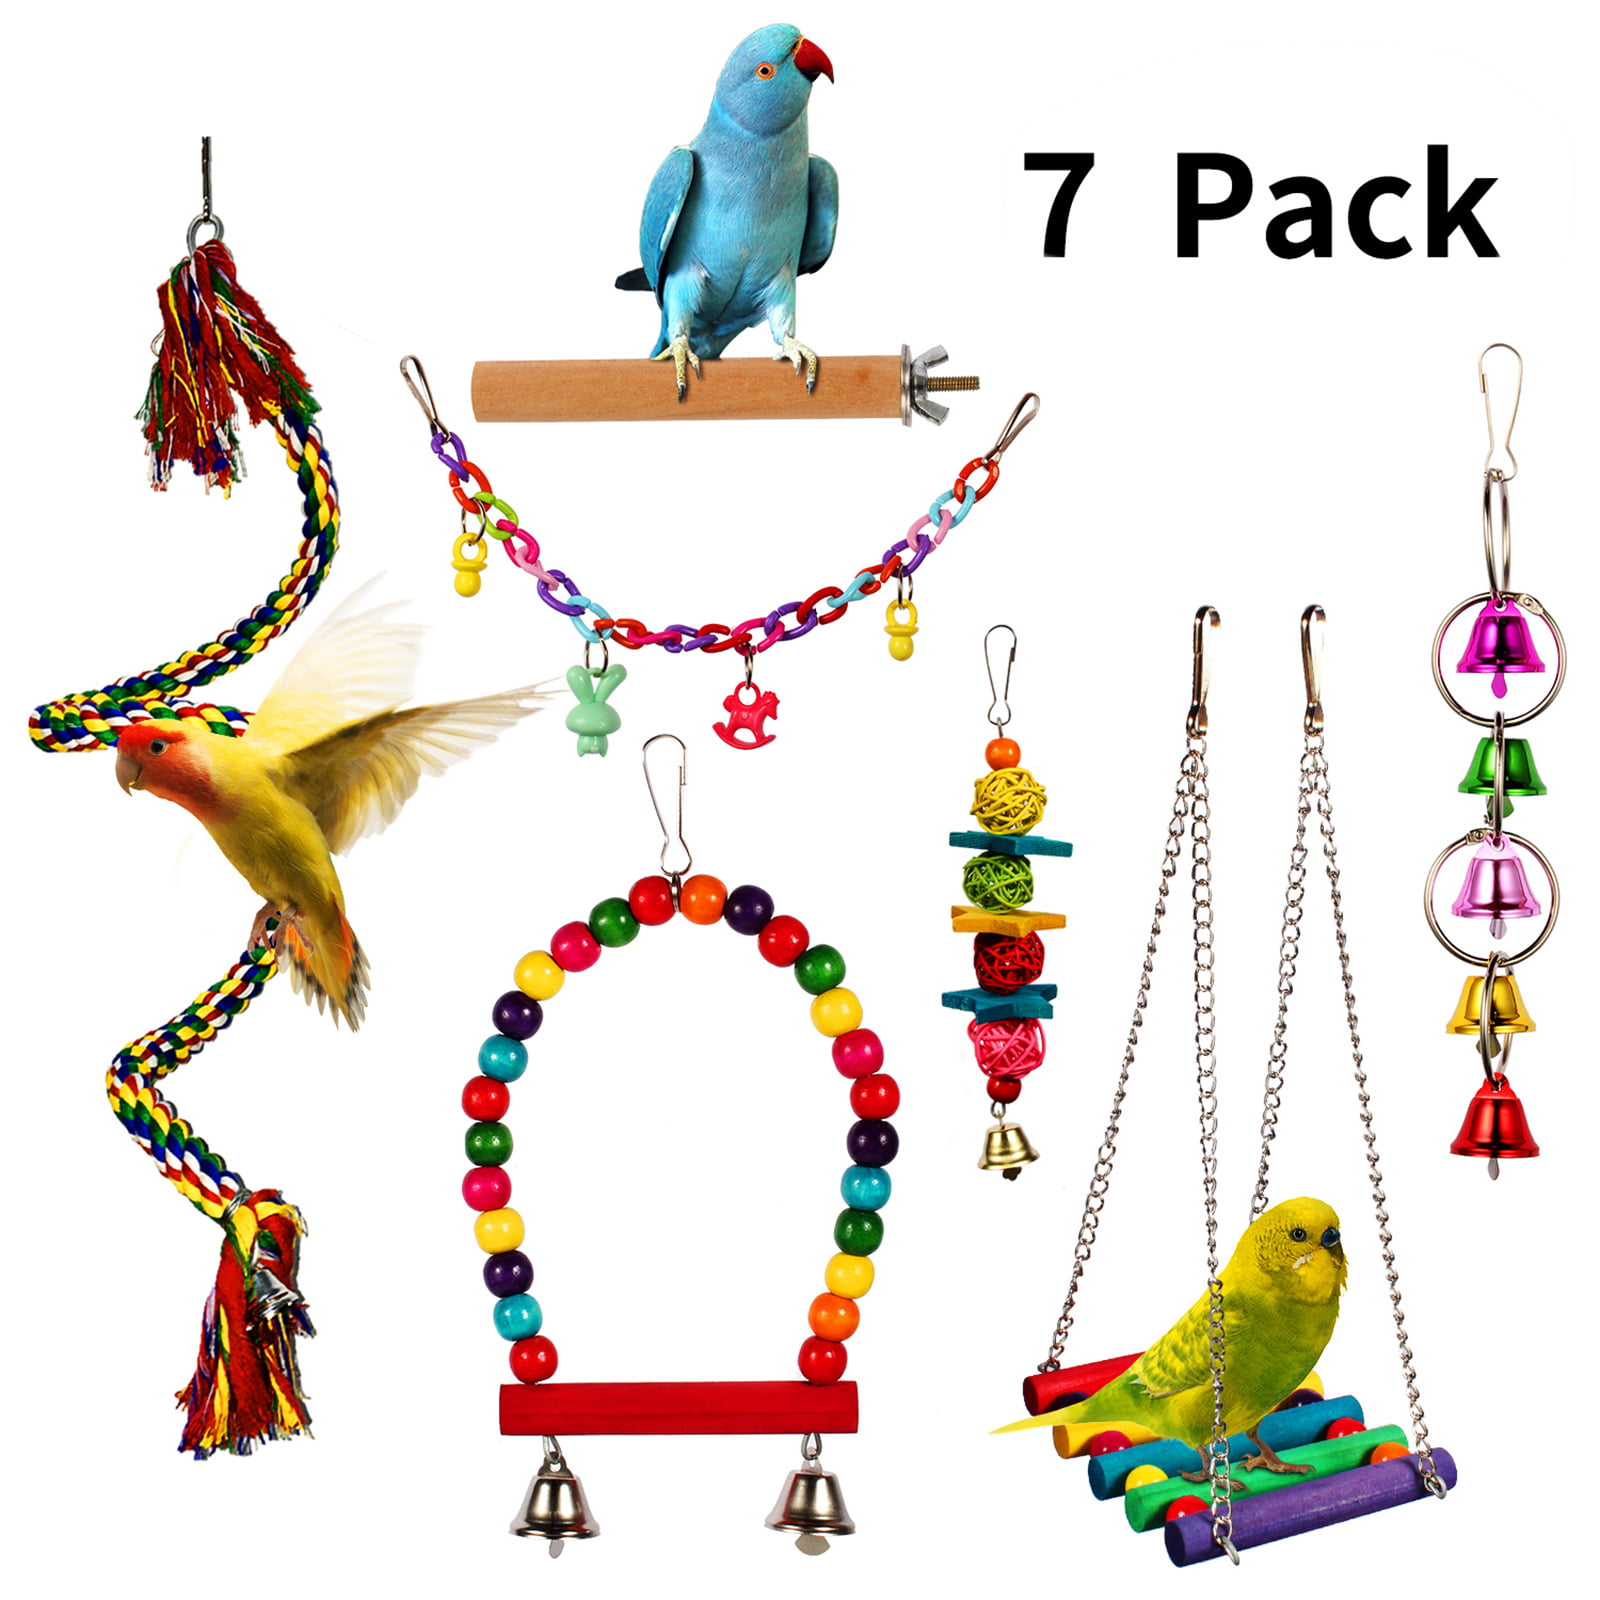 Chew Toy Hang Rope Playing Toys Game Pet Bird Parrot Swing Hanging Toys Q 